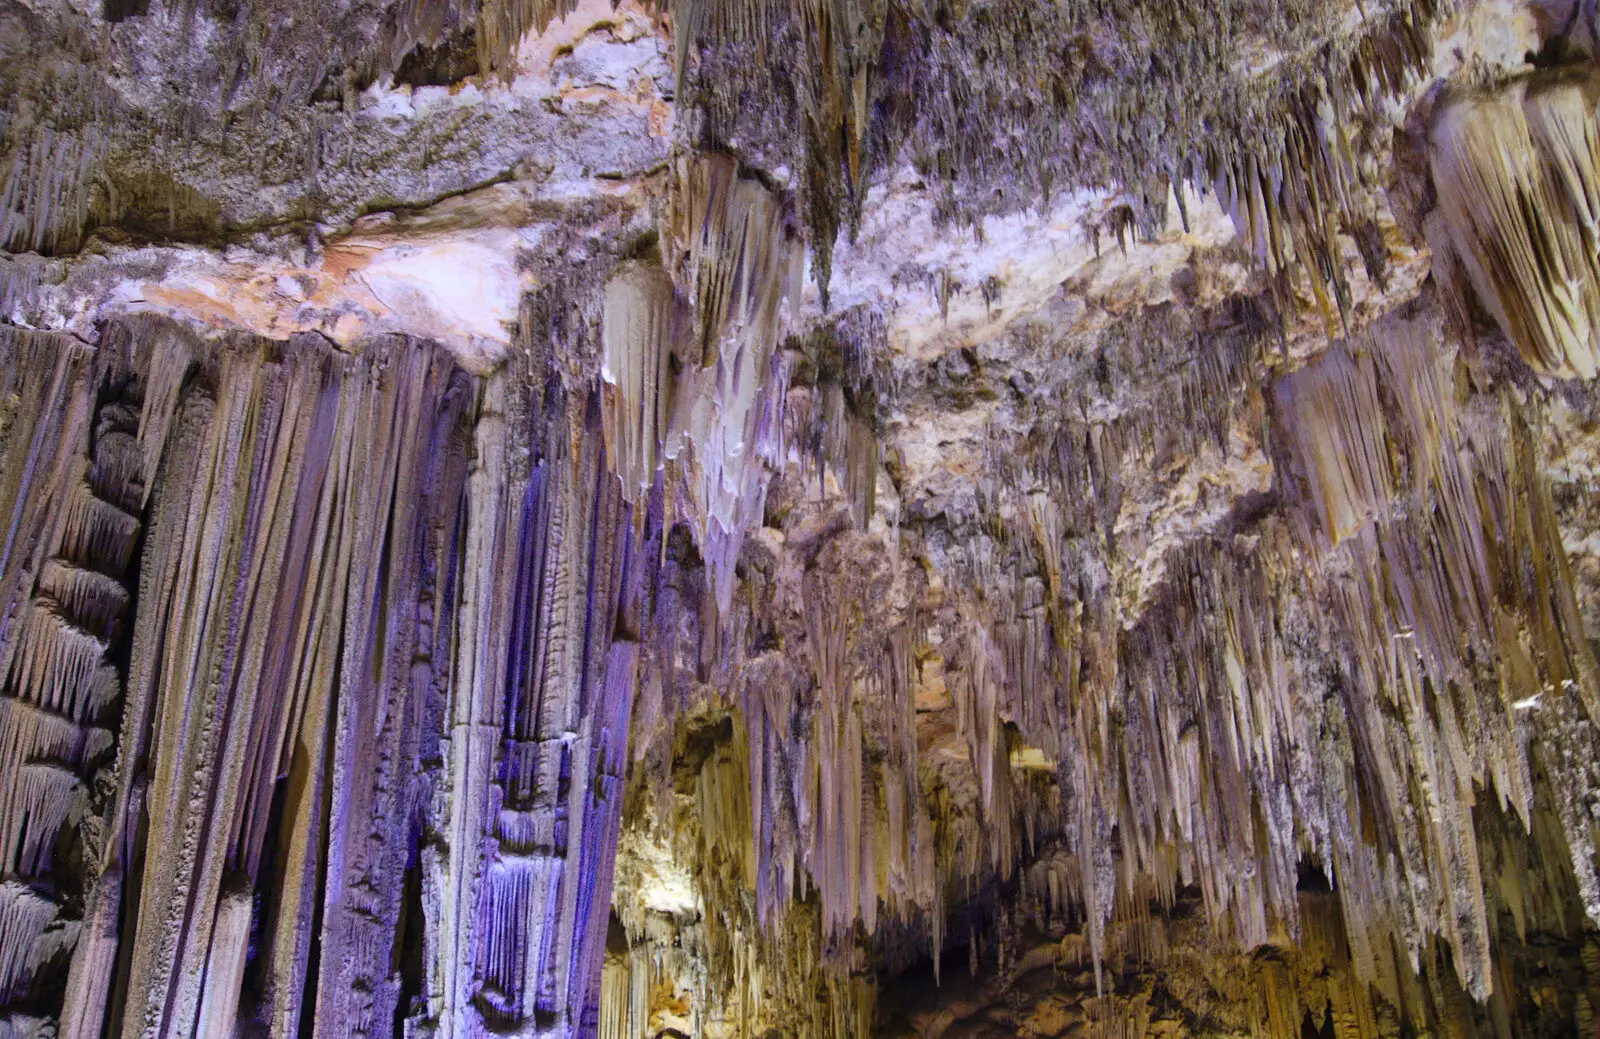 Some more stalactite action, from The Caves of Nerja, and Frigiliana, Andalusia, Spain - 18th April 2019